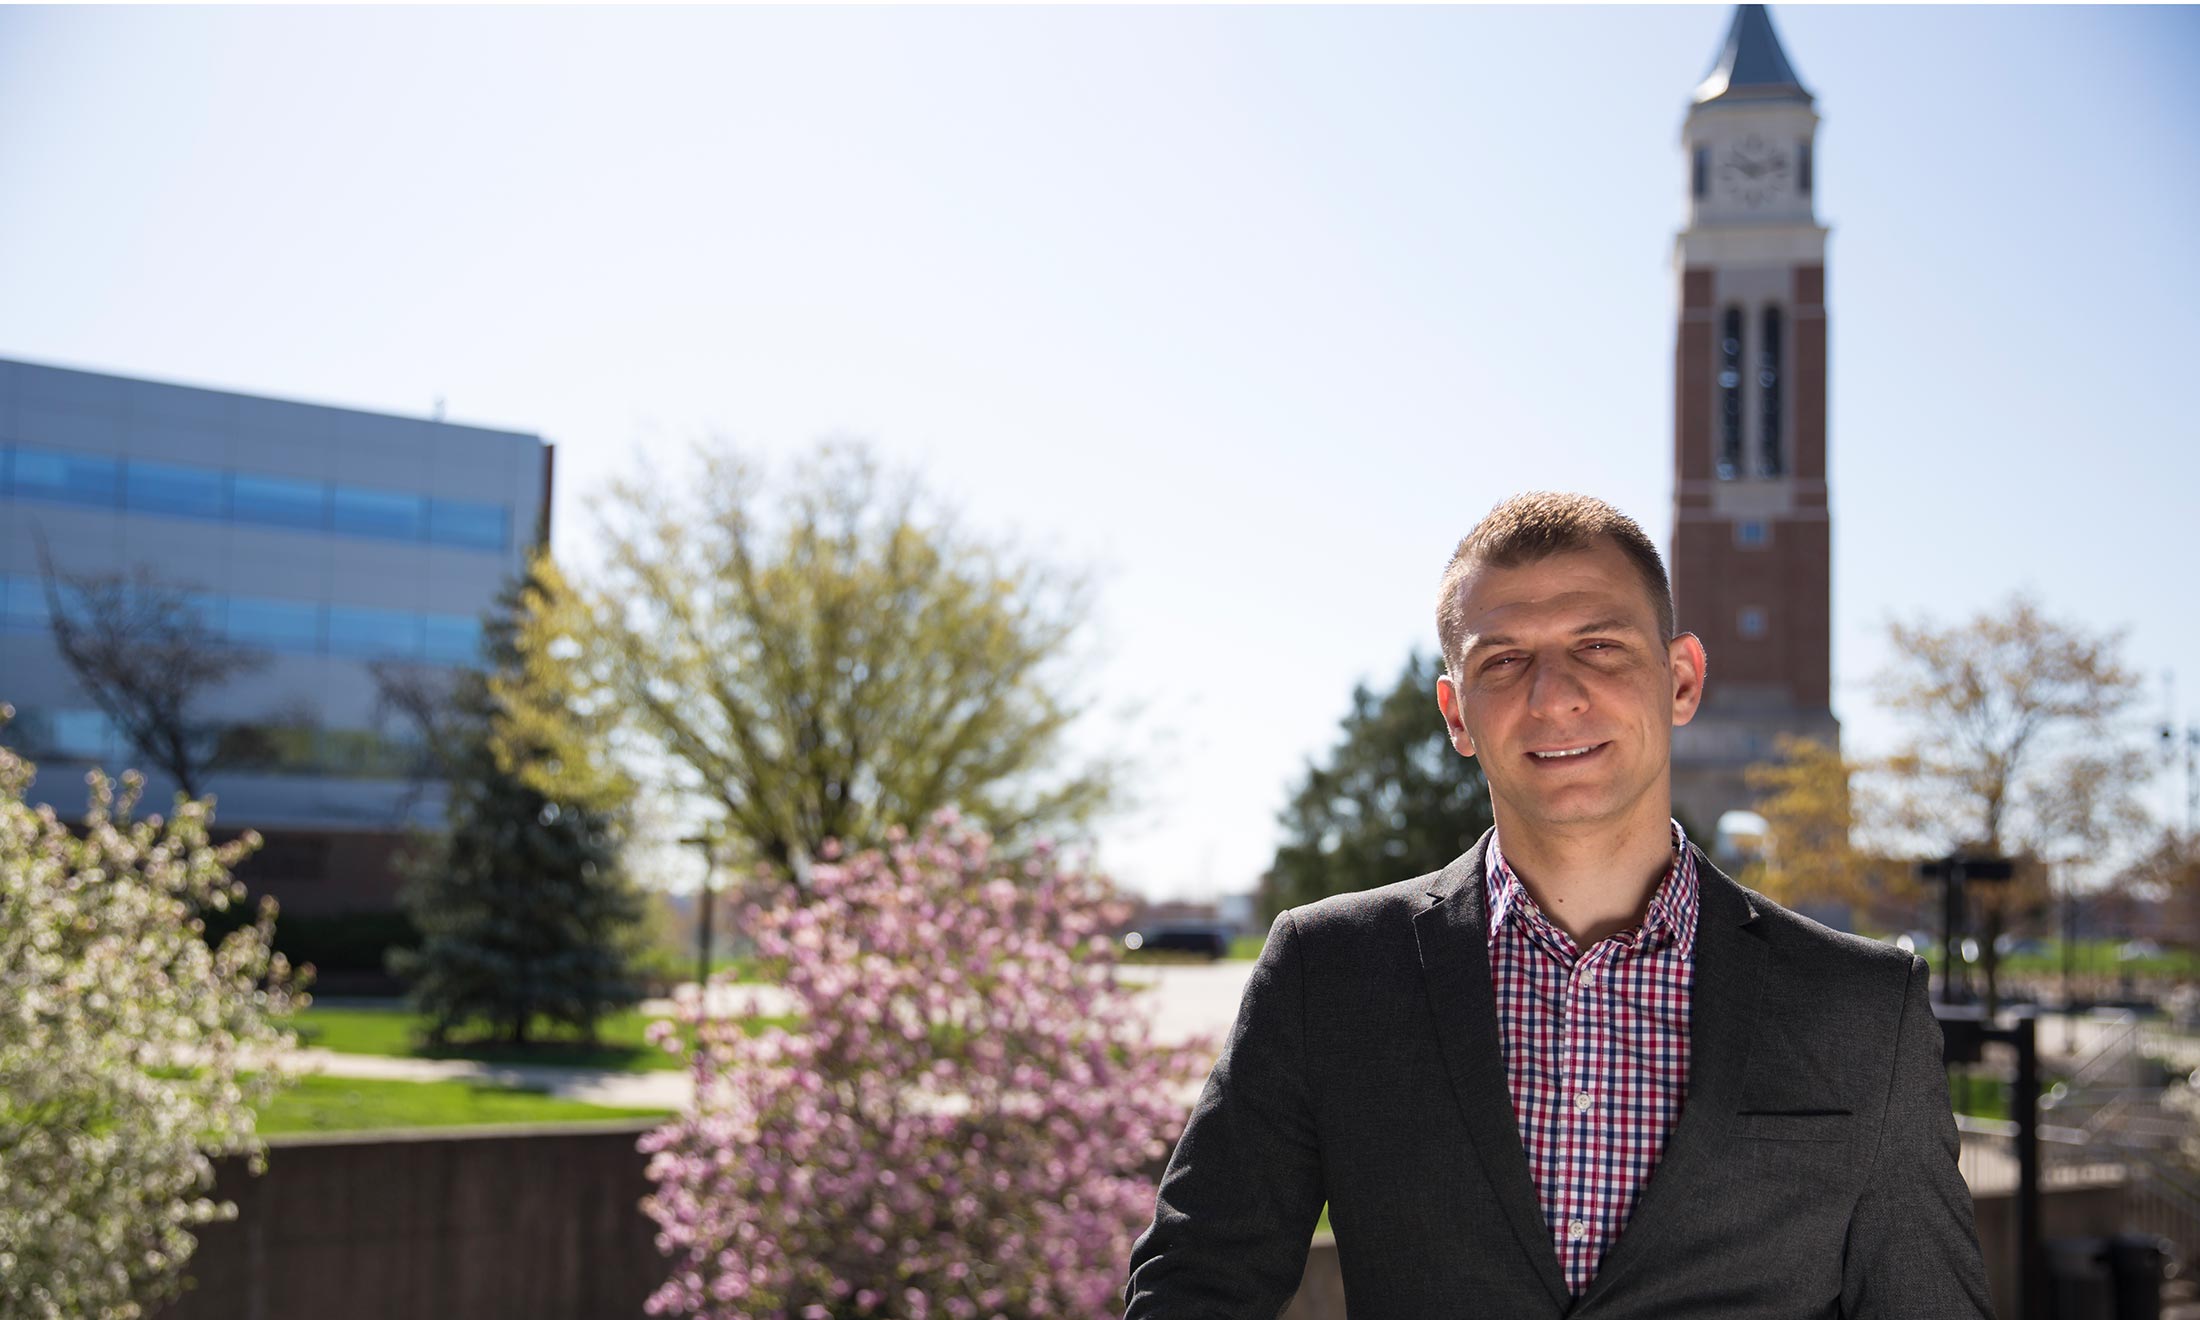 Oakland University graduate Sean Kosofsky poses for a photo during an afternoon on campus with Elliott Tower in the background